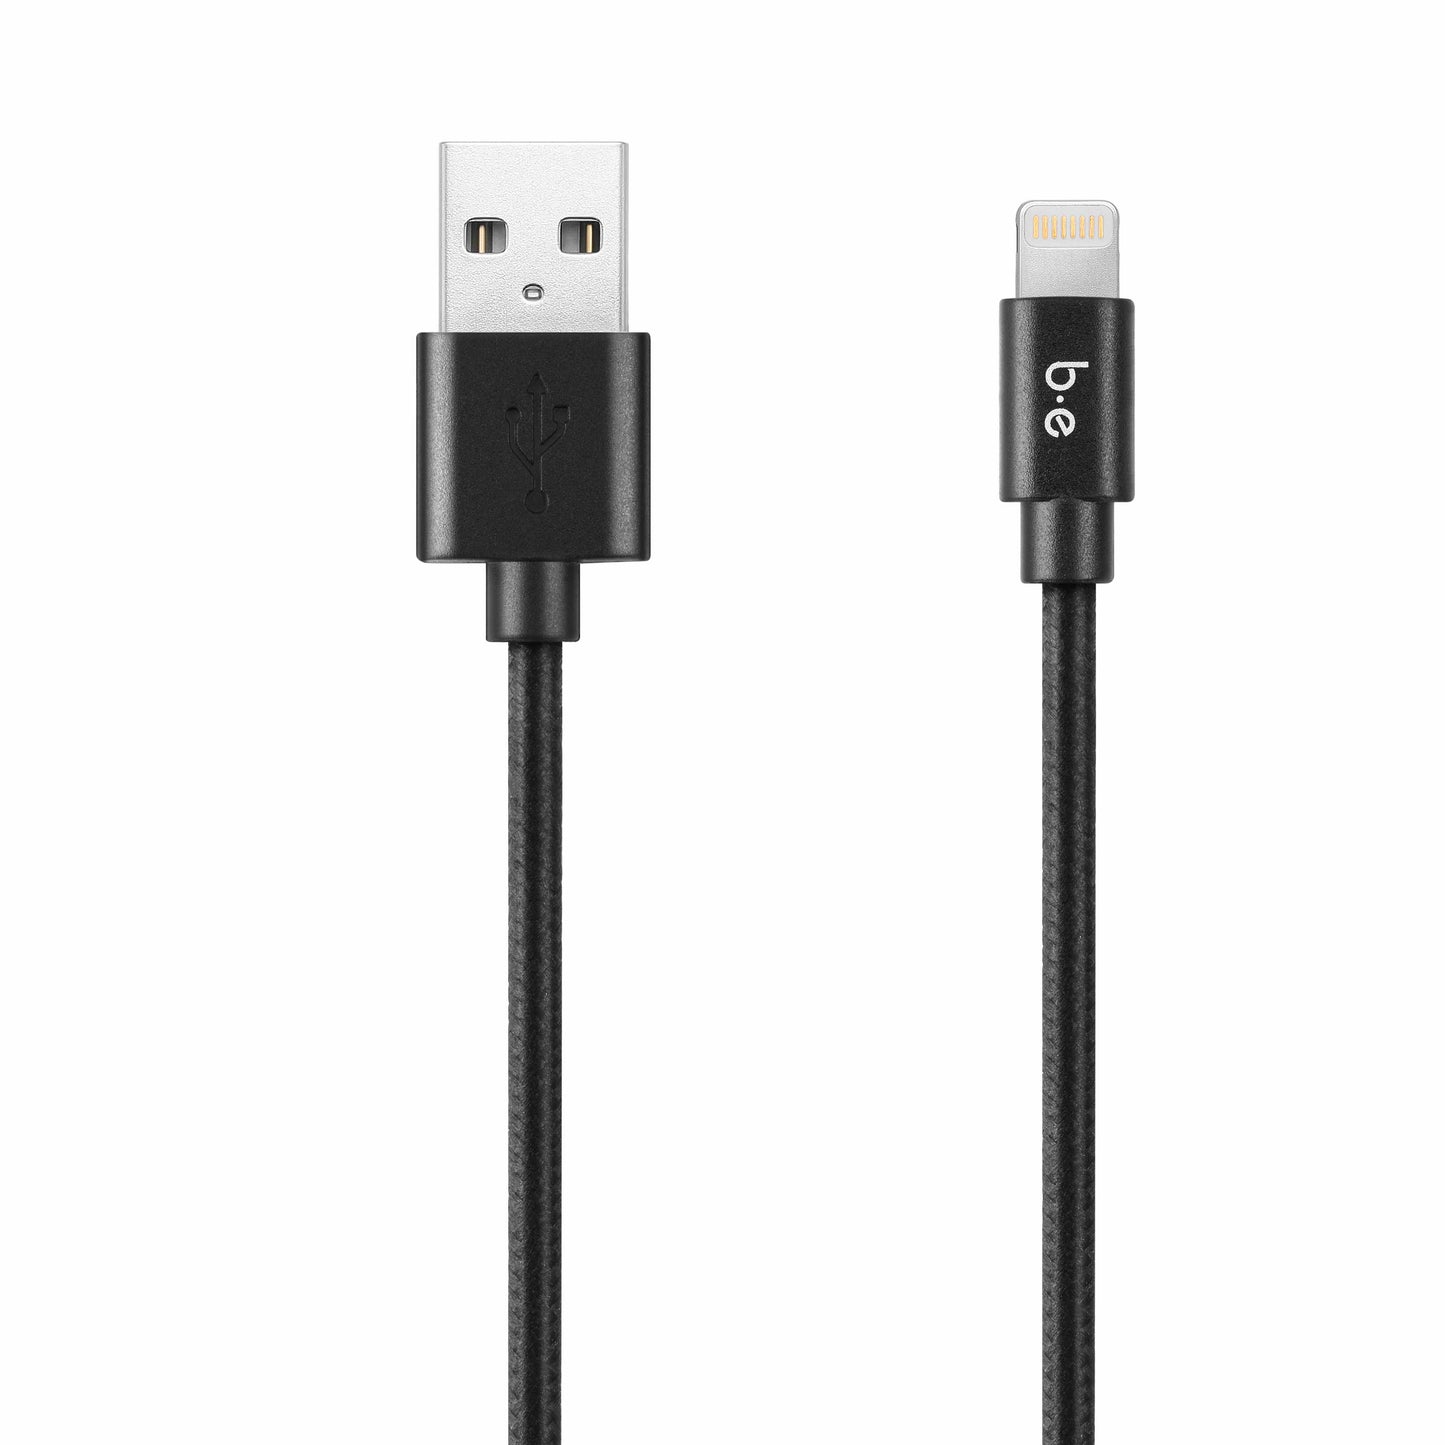 Braided Charge/Sync Lightning USB Cable 6ft Black/Skynet